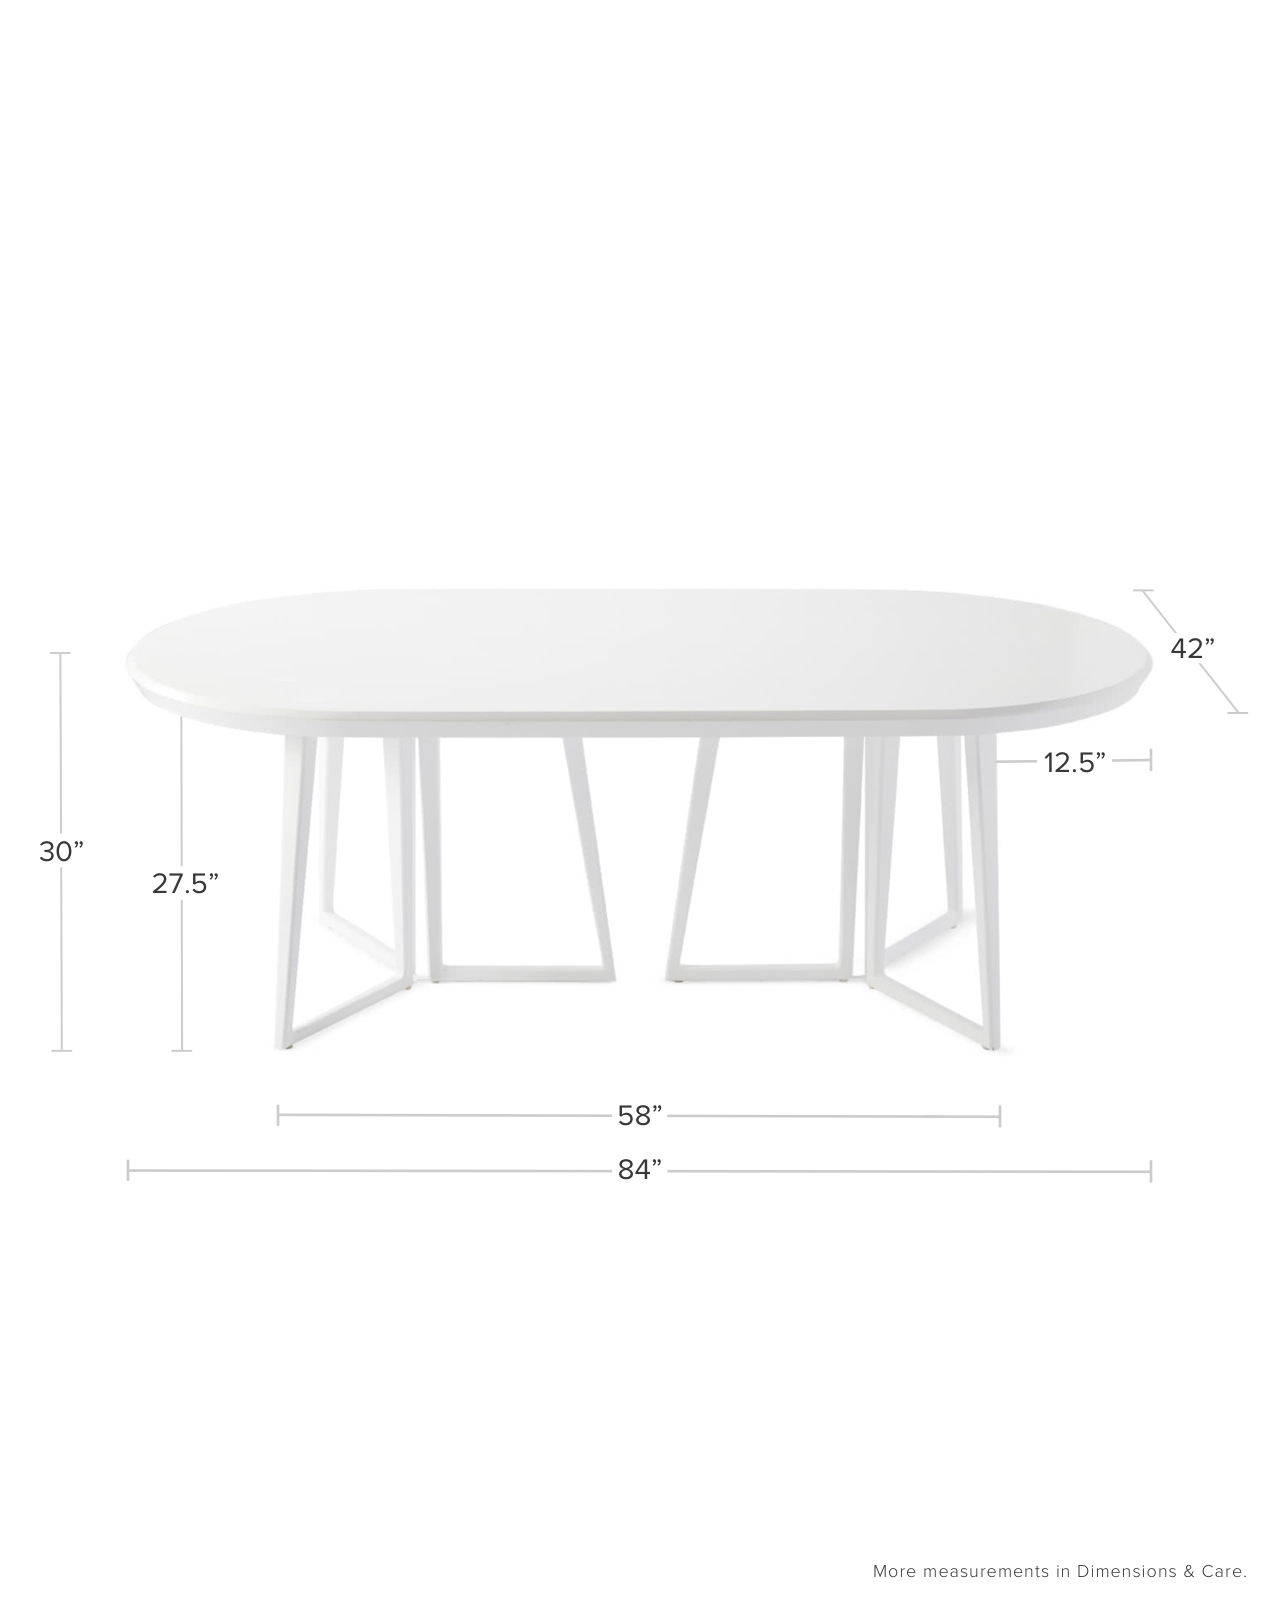 Downing Oval Dining Table -Salt Spray - Image 2